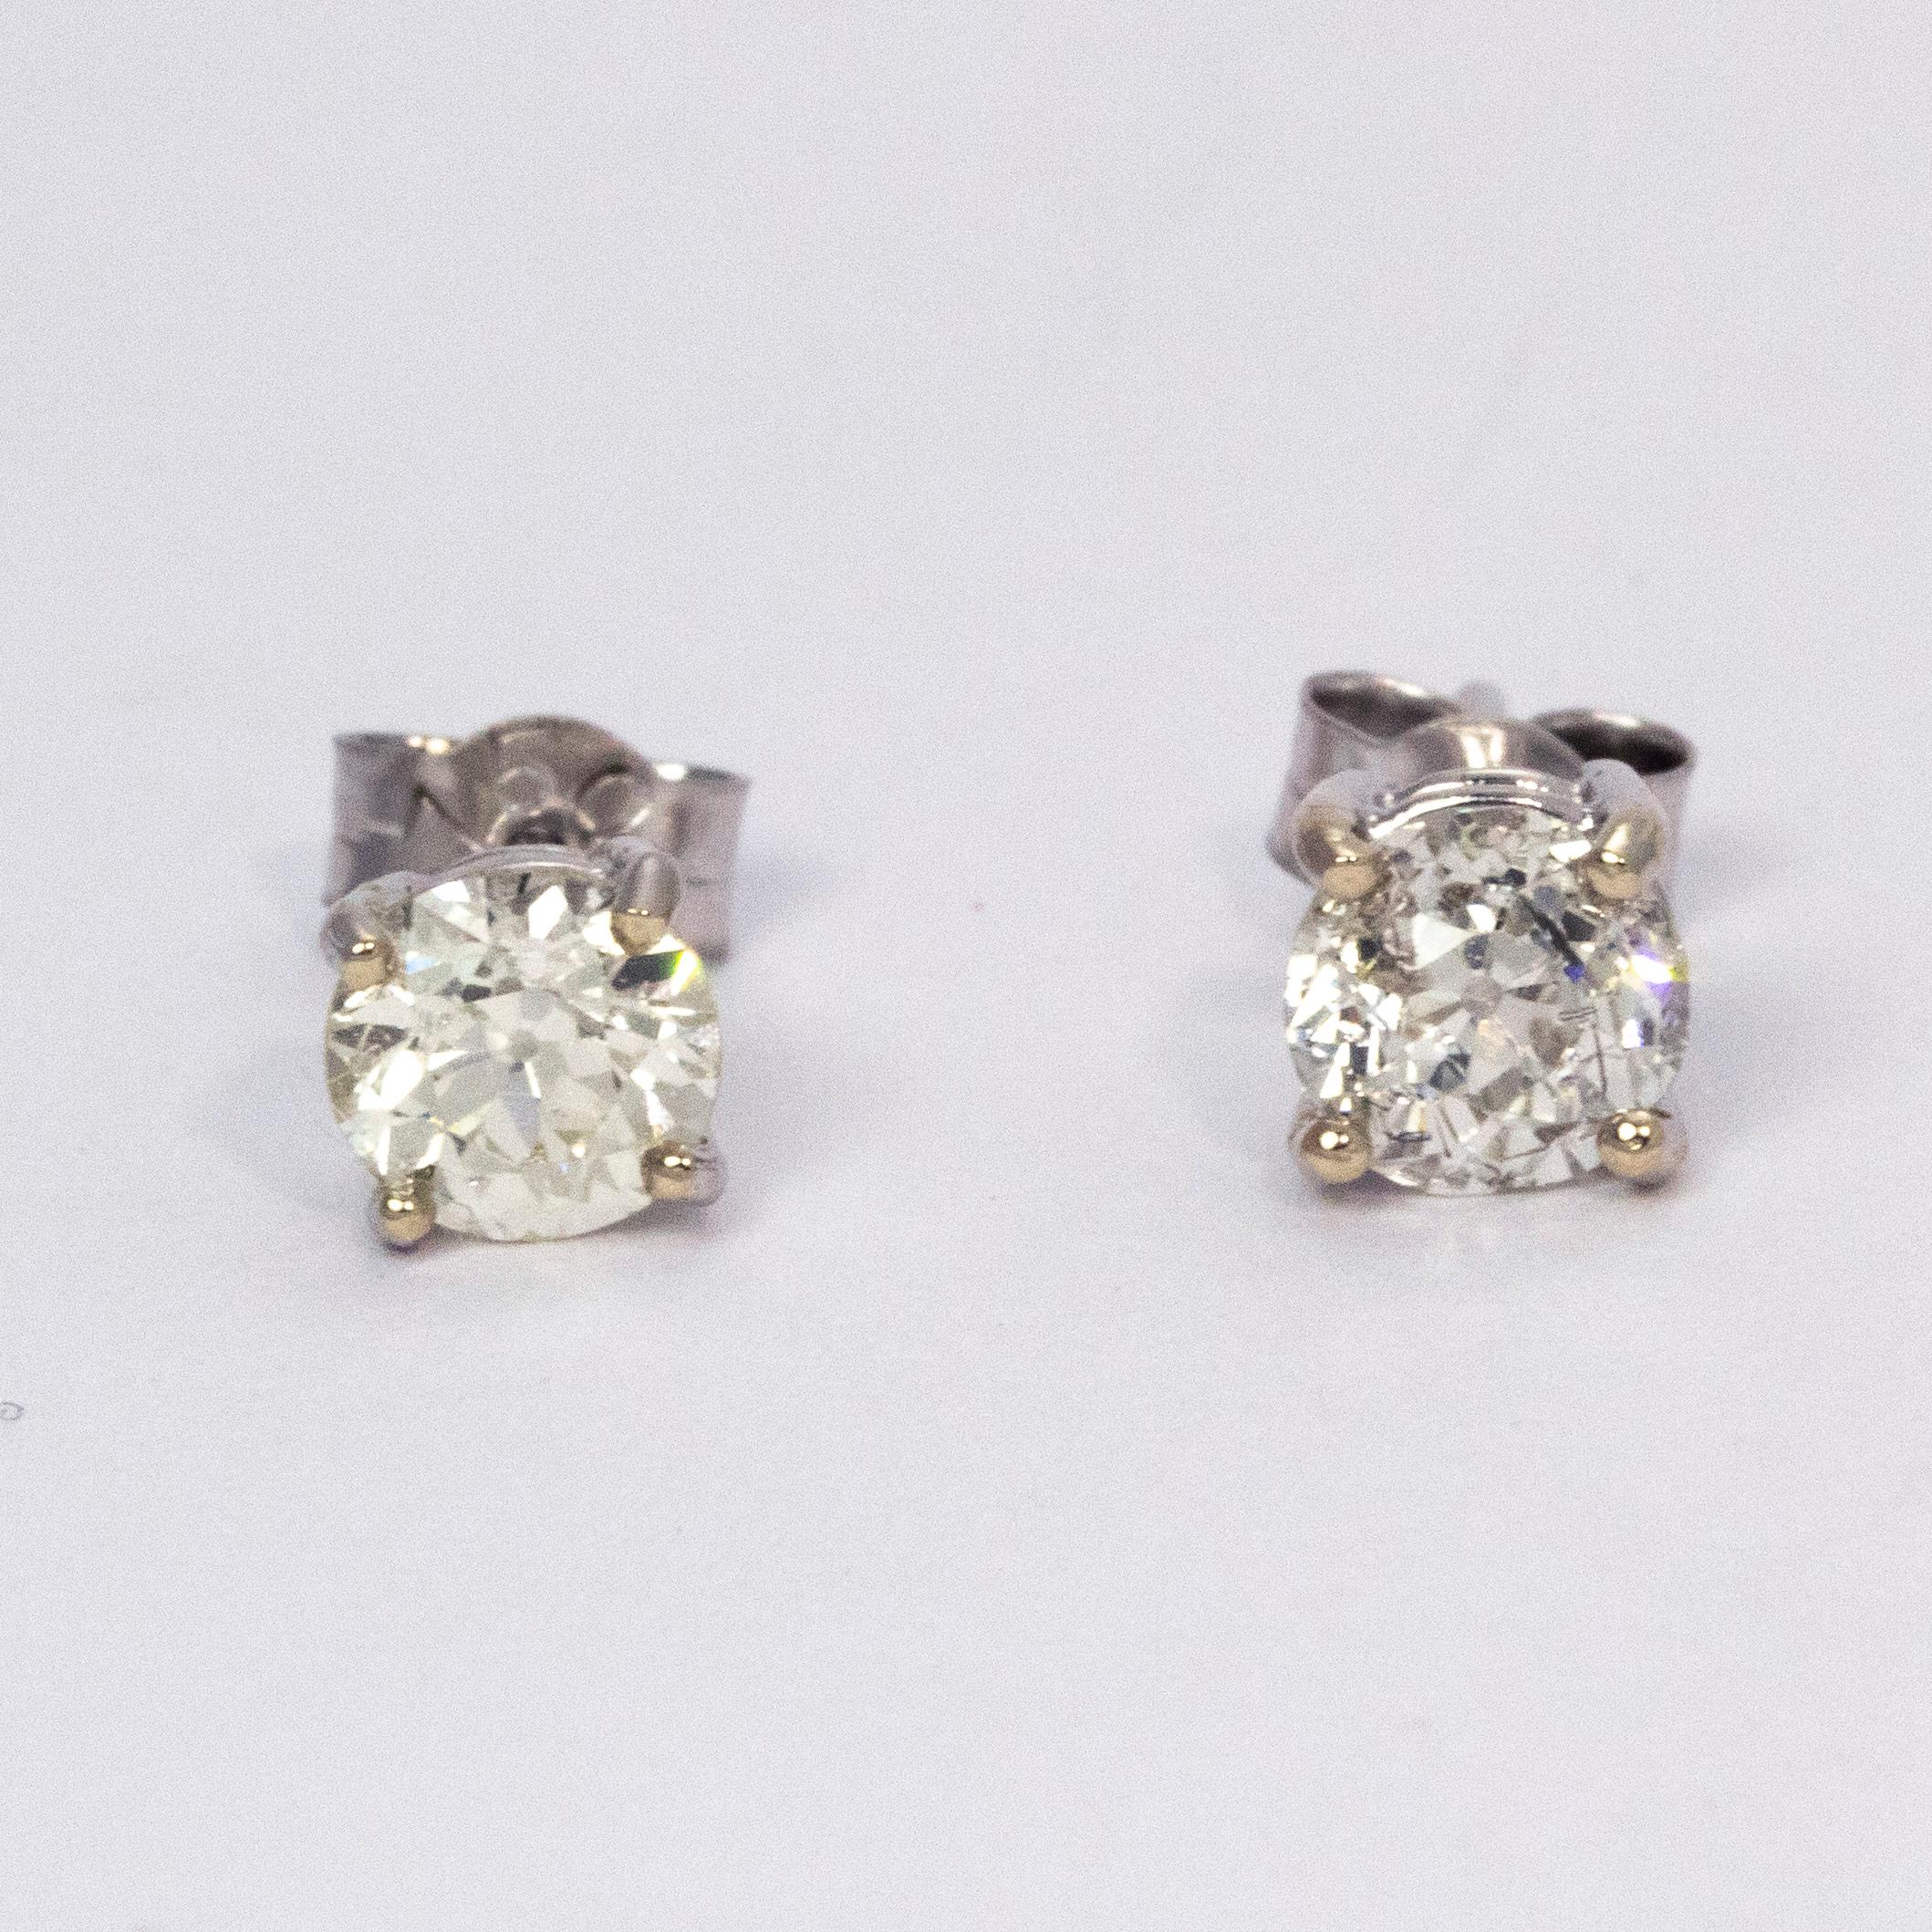 Sparkling earrings holding 0.66 and 0.68 carat diamonds set simply in 18ct white gold.